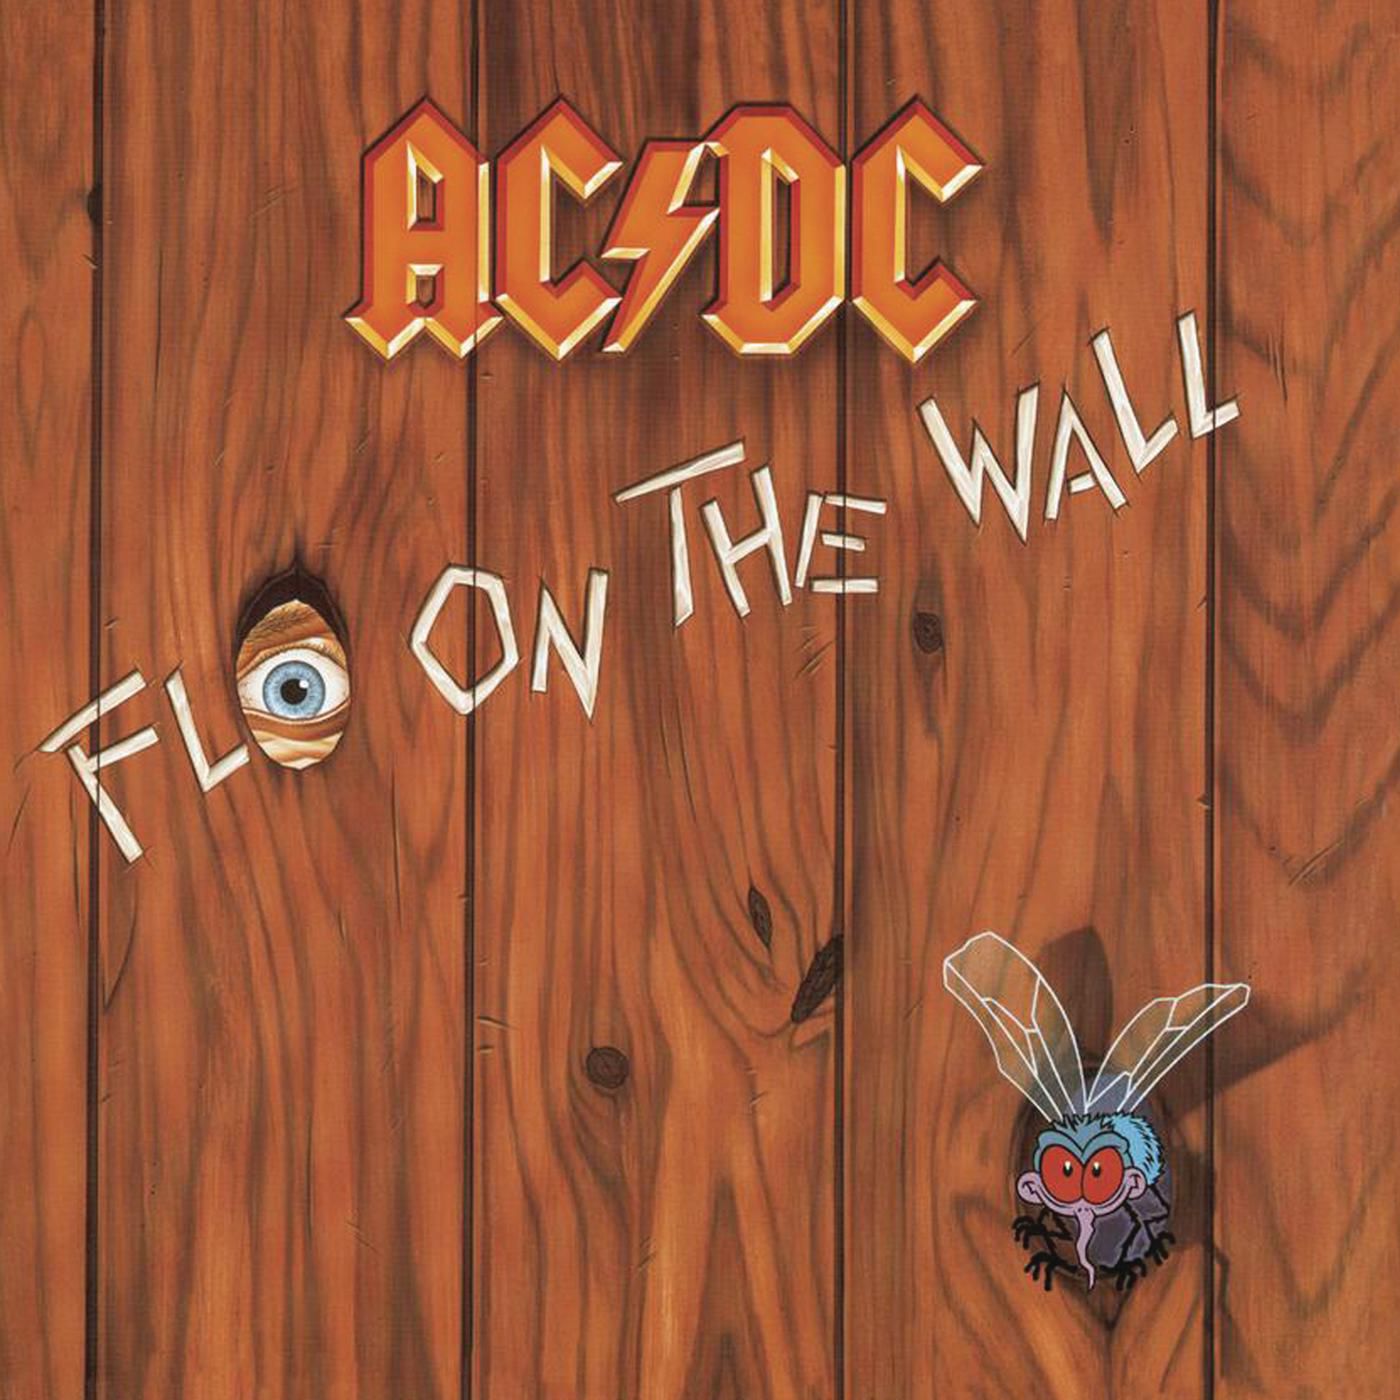 ACDC - 1985 - Fly On The Wall [2020 Coumbia Records] 24-96